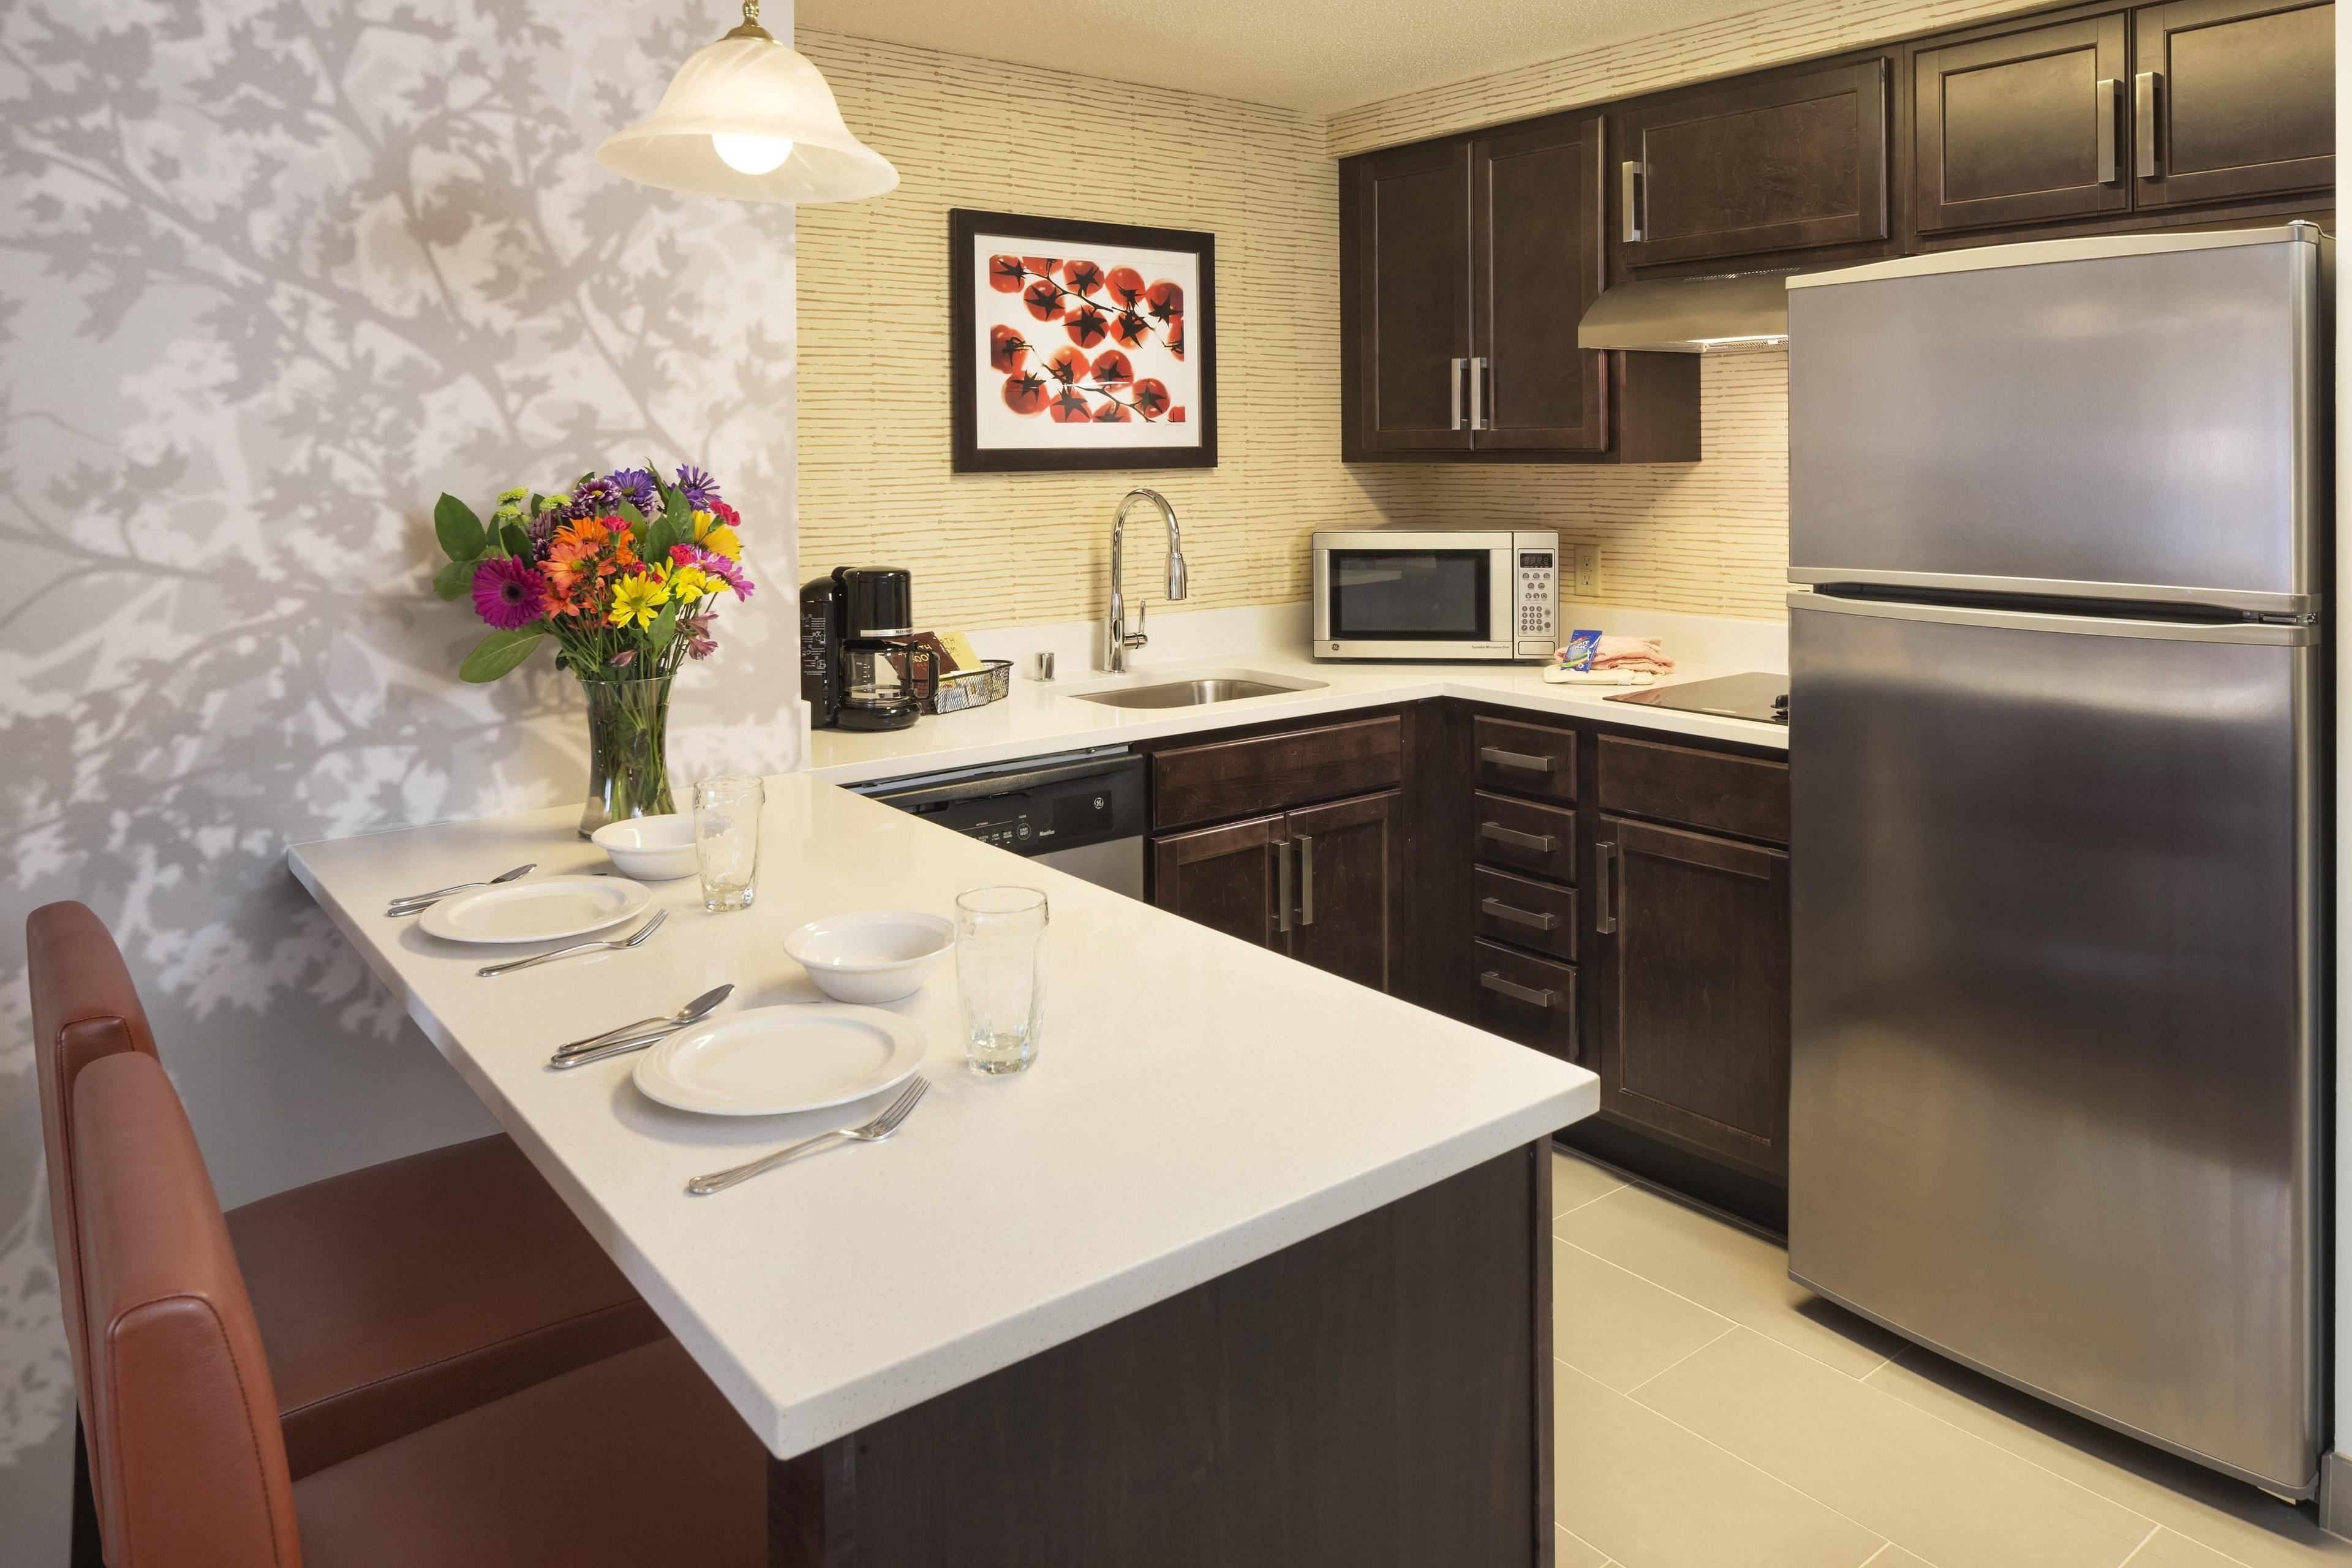 All rooms feature our up-to-date, fully equipped kitchen. Why not let us do your grocery shopping for you? We provide complimentary grocery shopping service for our guests each day!